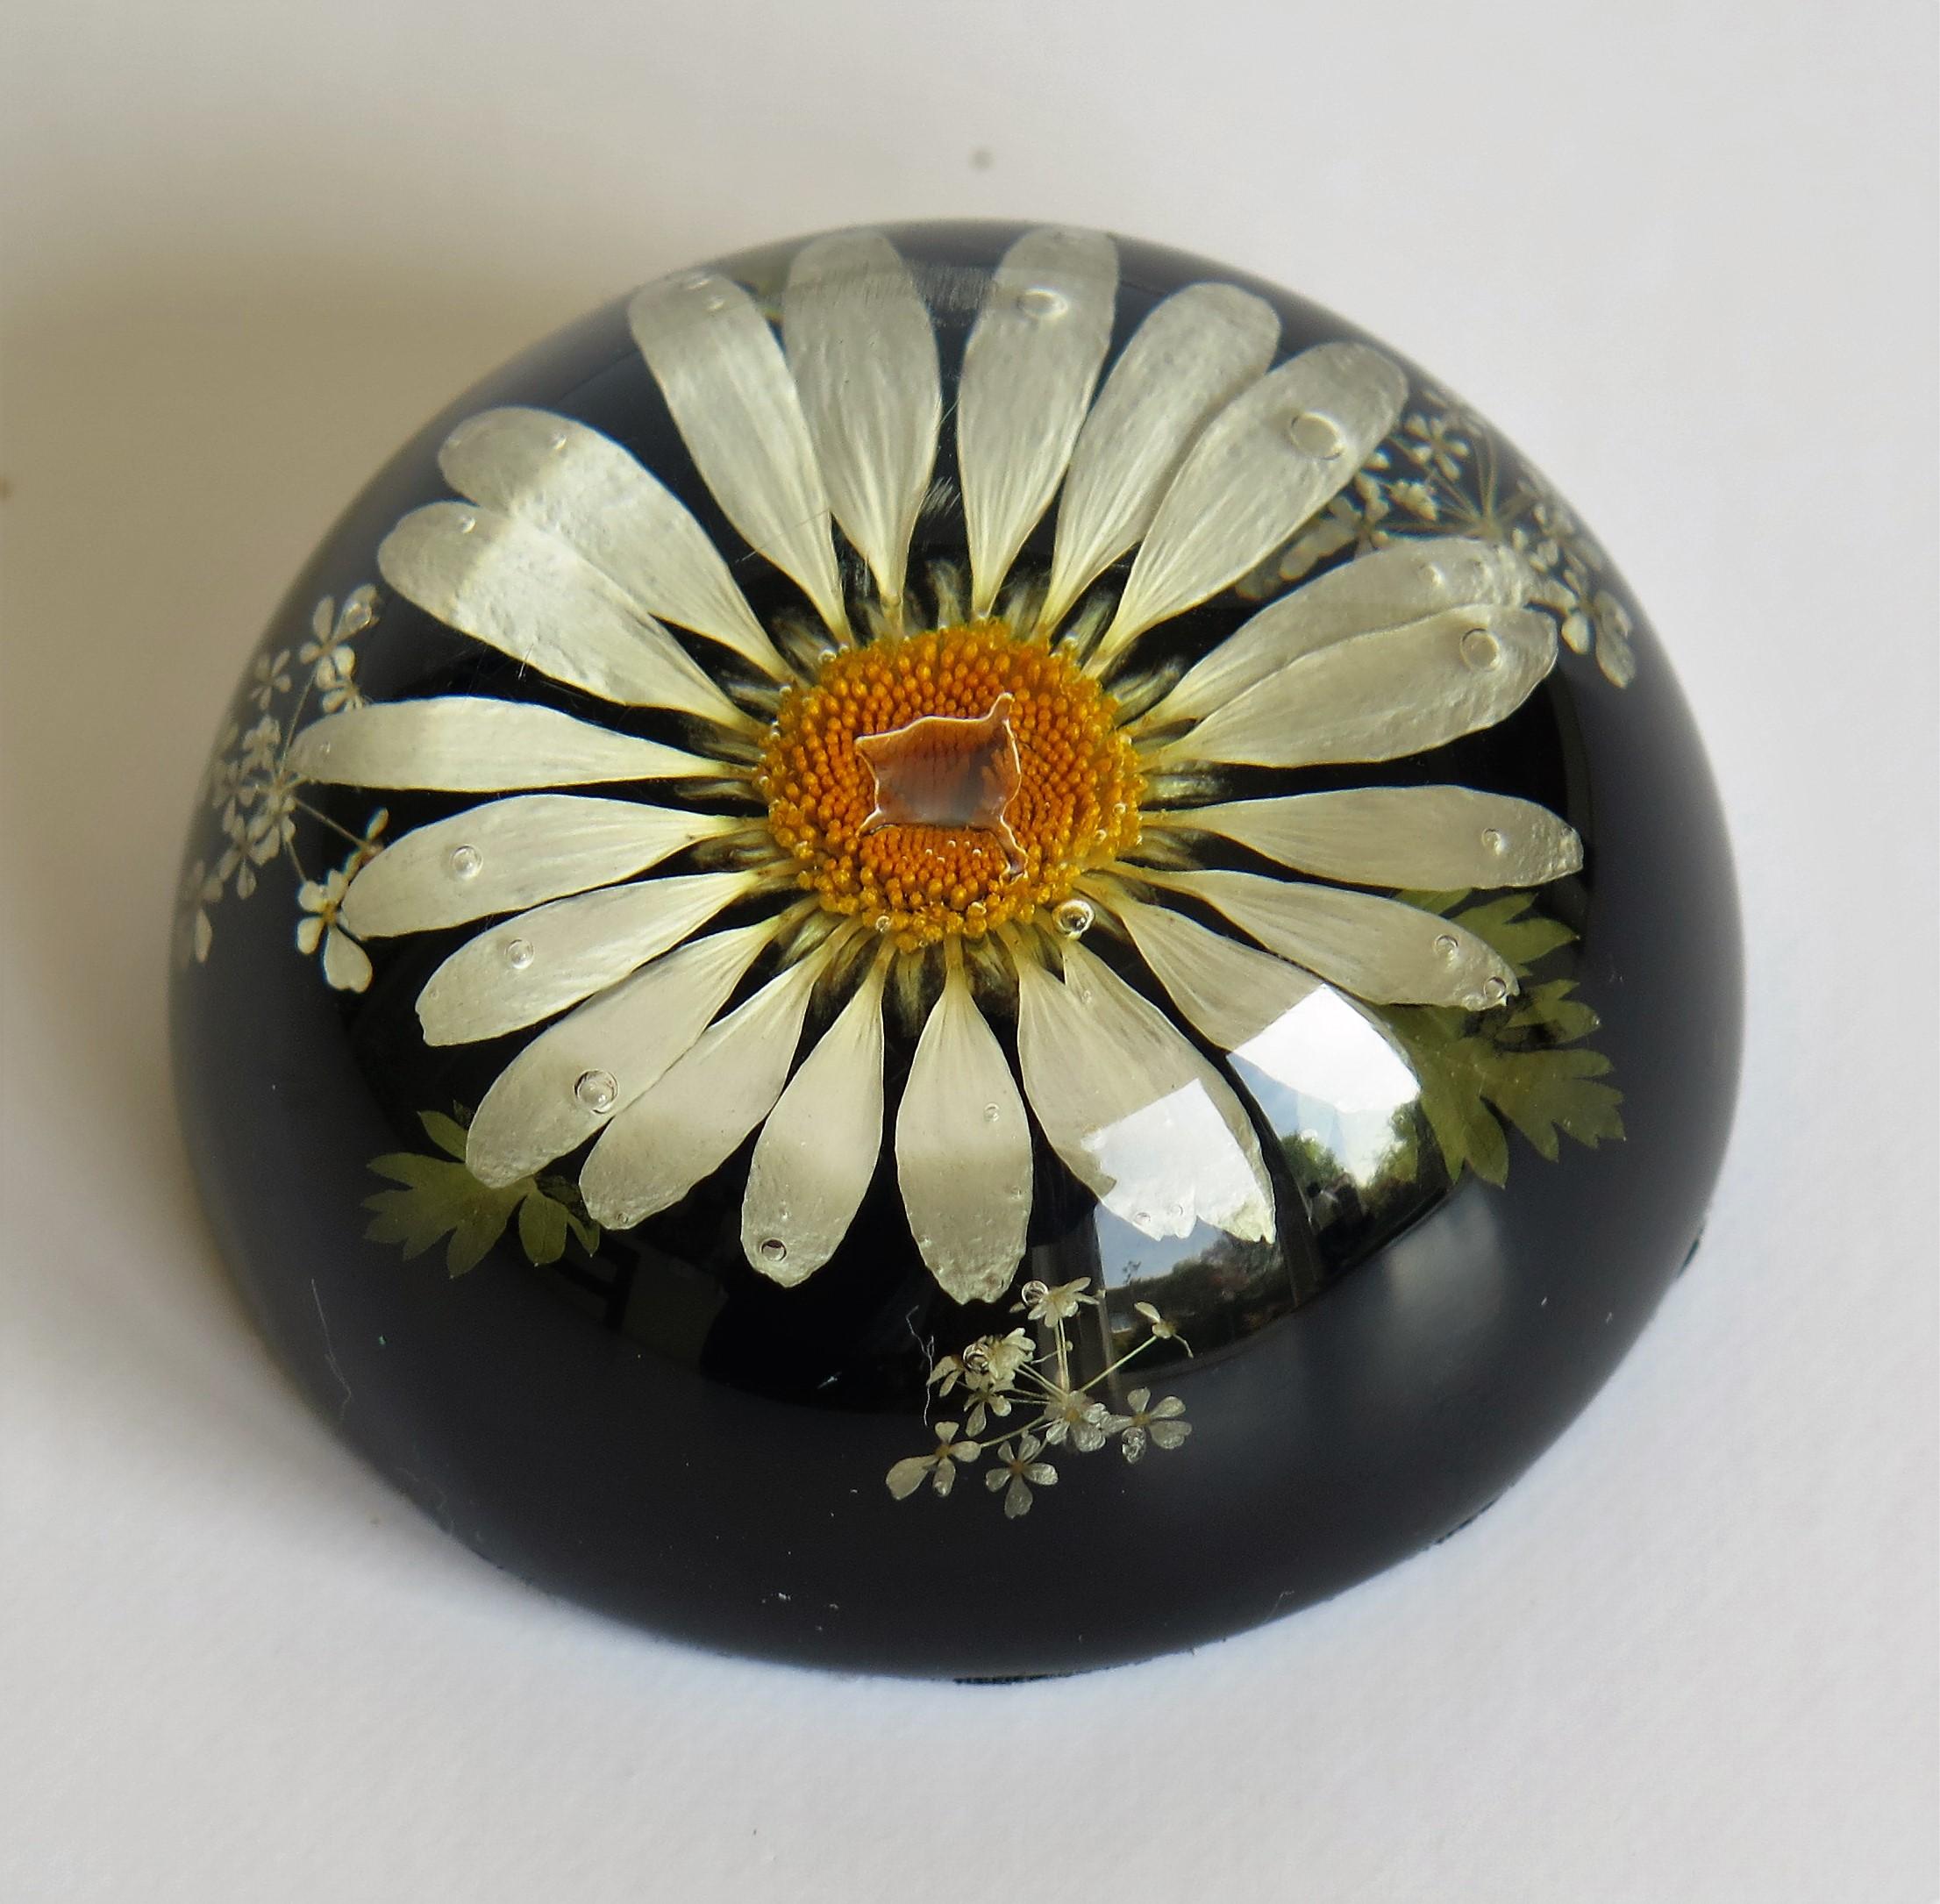 Other Daisy Paperweight Handmade with Real Flowers by Sarah Rogers, English